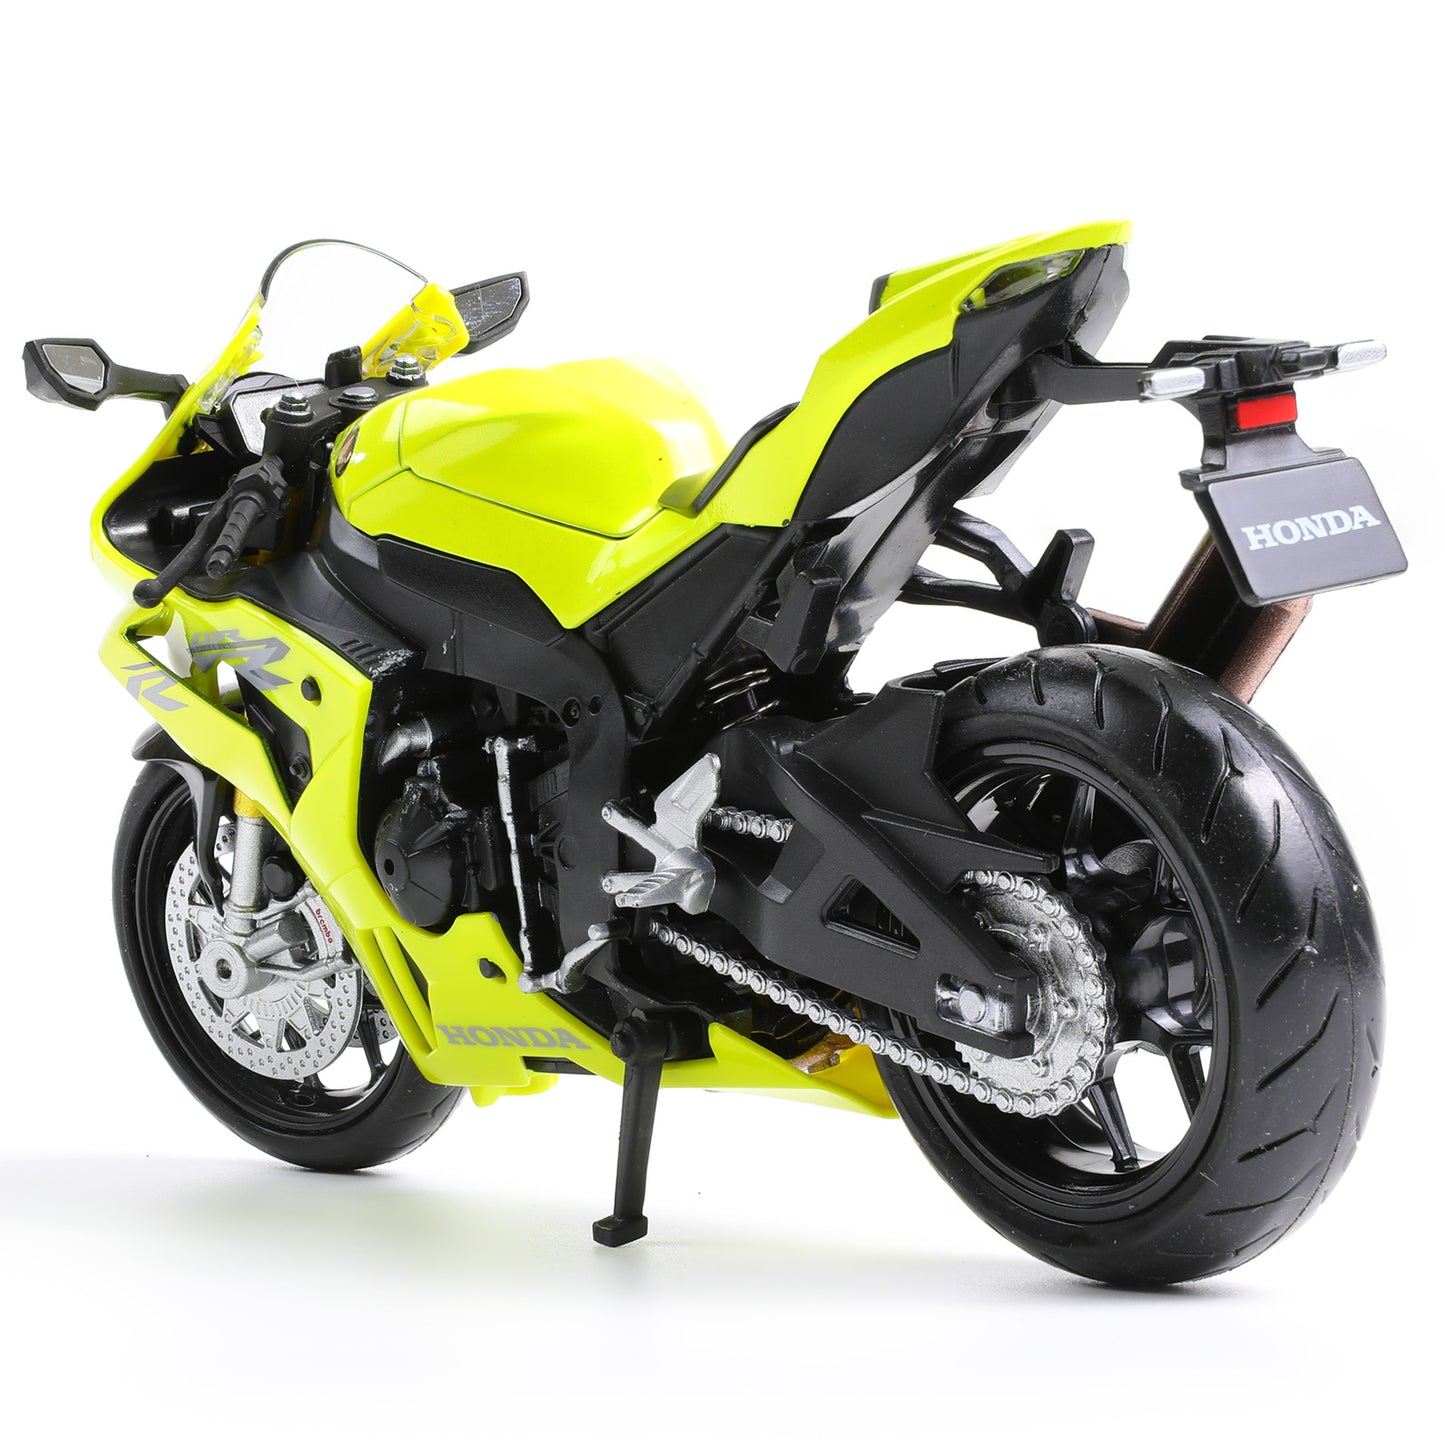 DieCast Motorcycle Model for HONDA CBR1000RR-R Firebade, Realistic Motorcycle Metal Model, 1:12 Scale Kids Moto Toy or Collection,MAKEDA Pre-Built Toys Gift